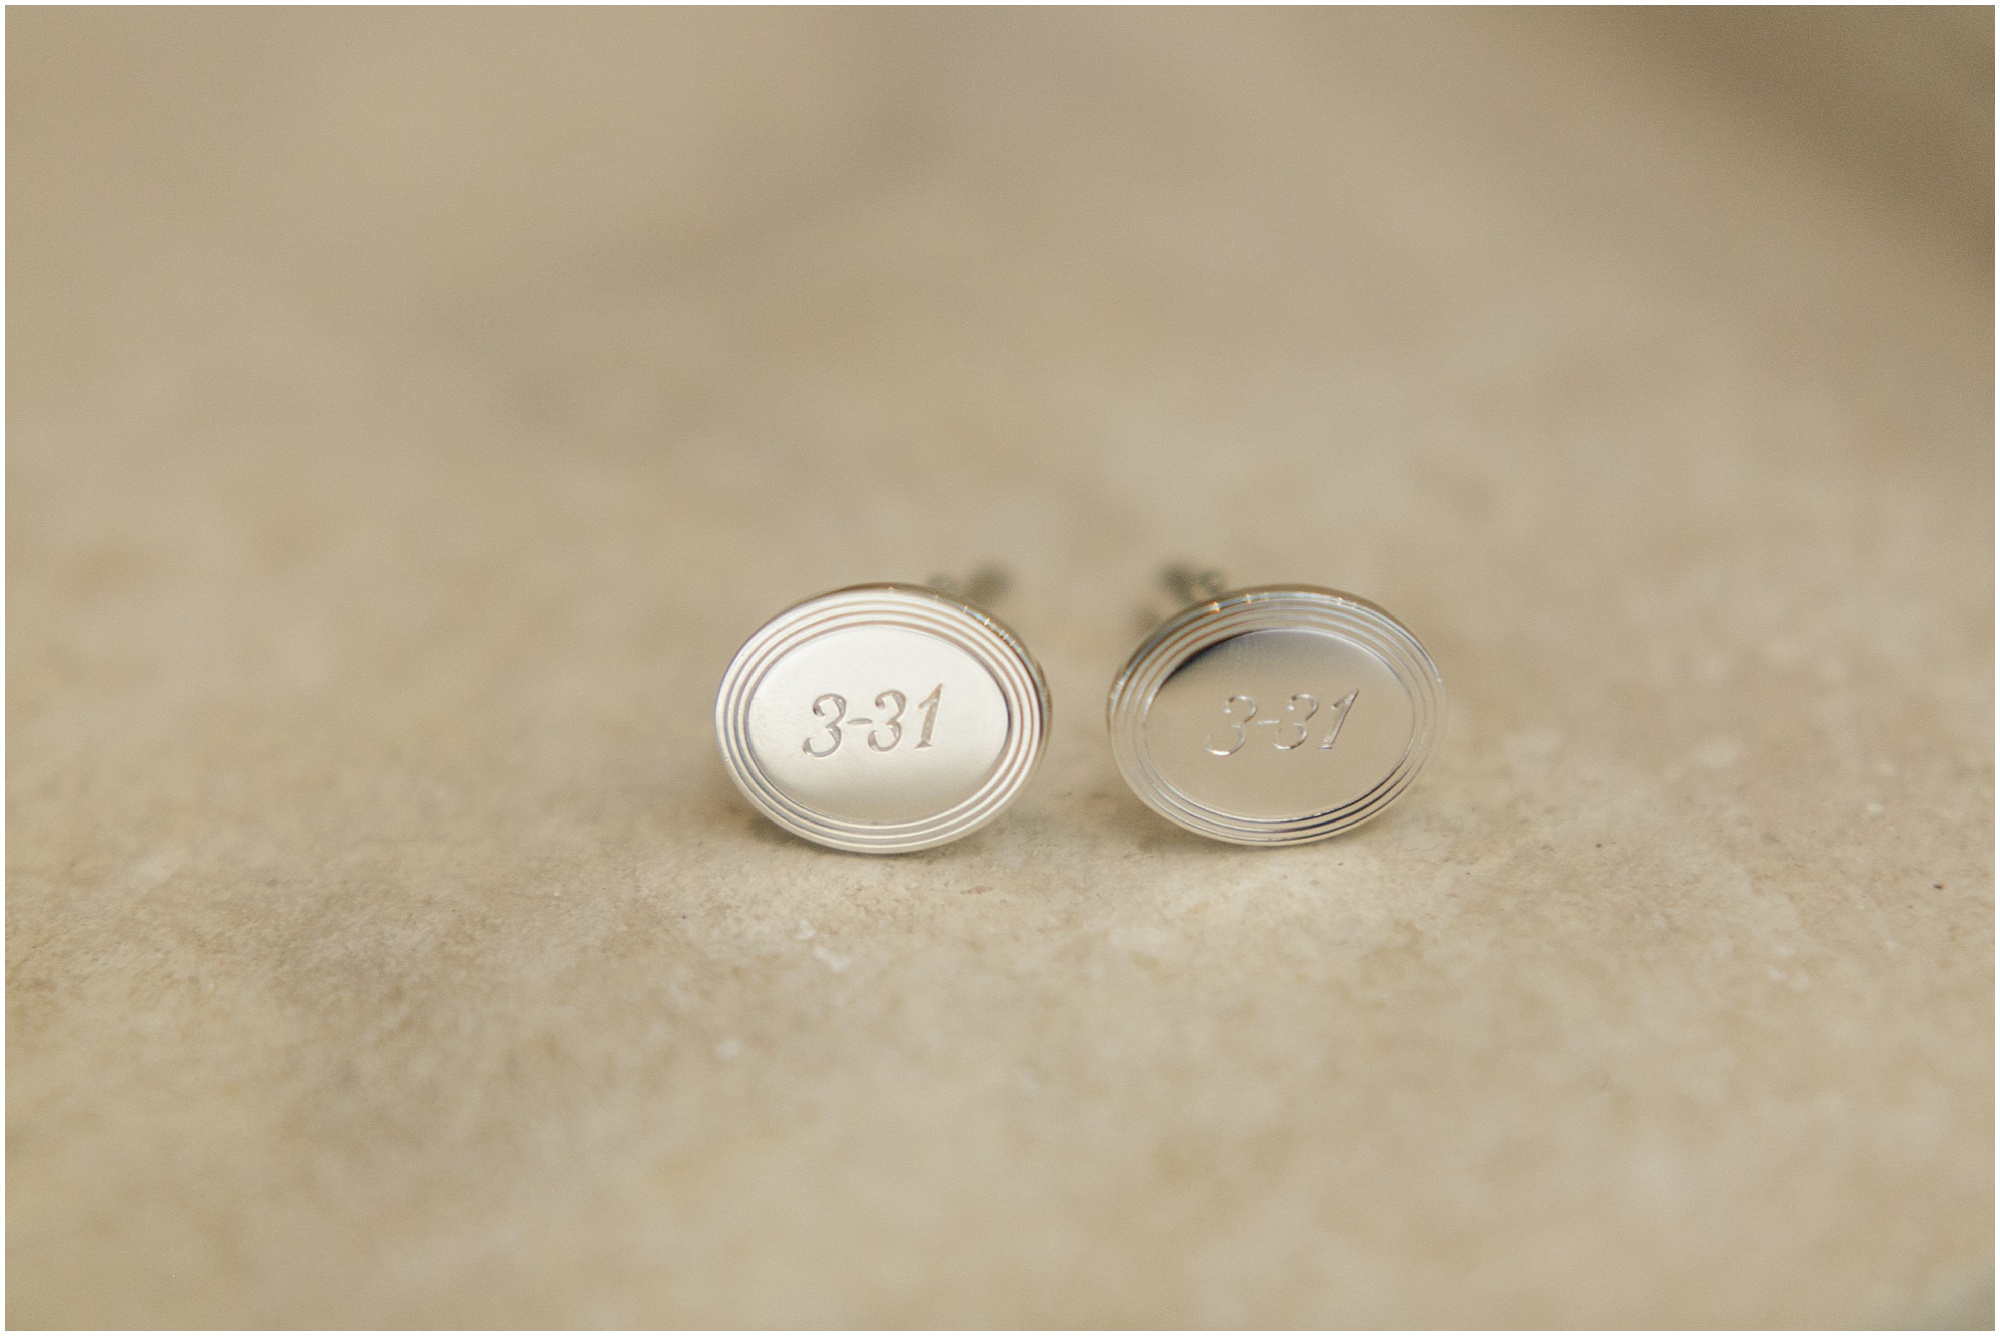 Grooms cufflinks with his wedding date engraved in them. 